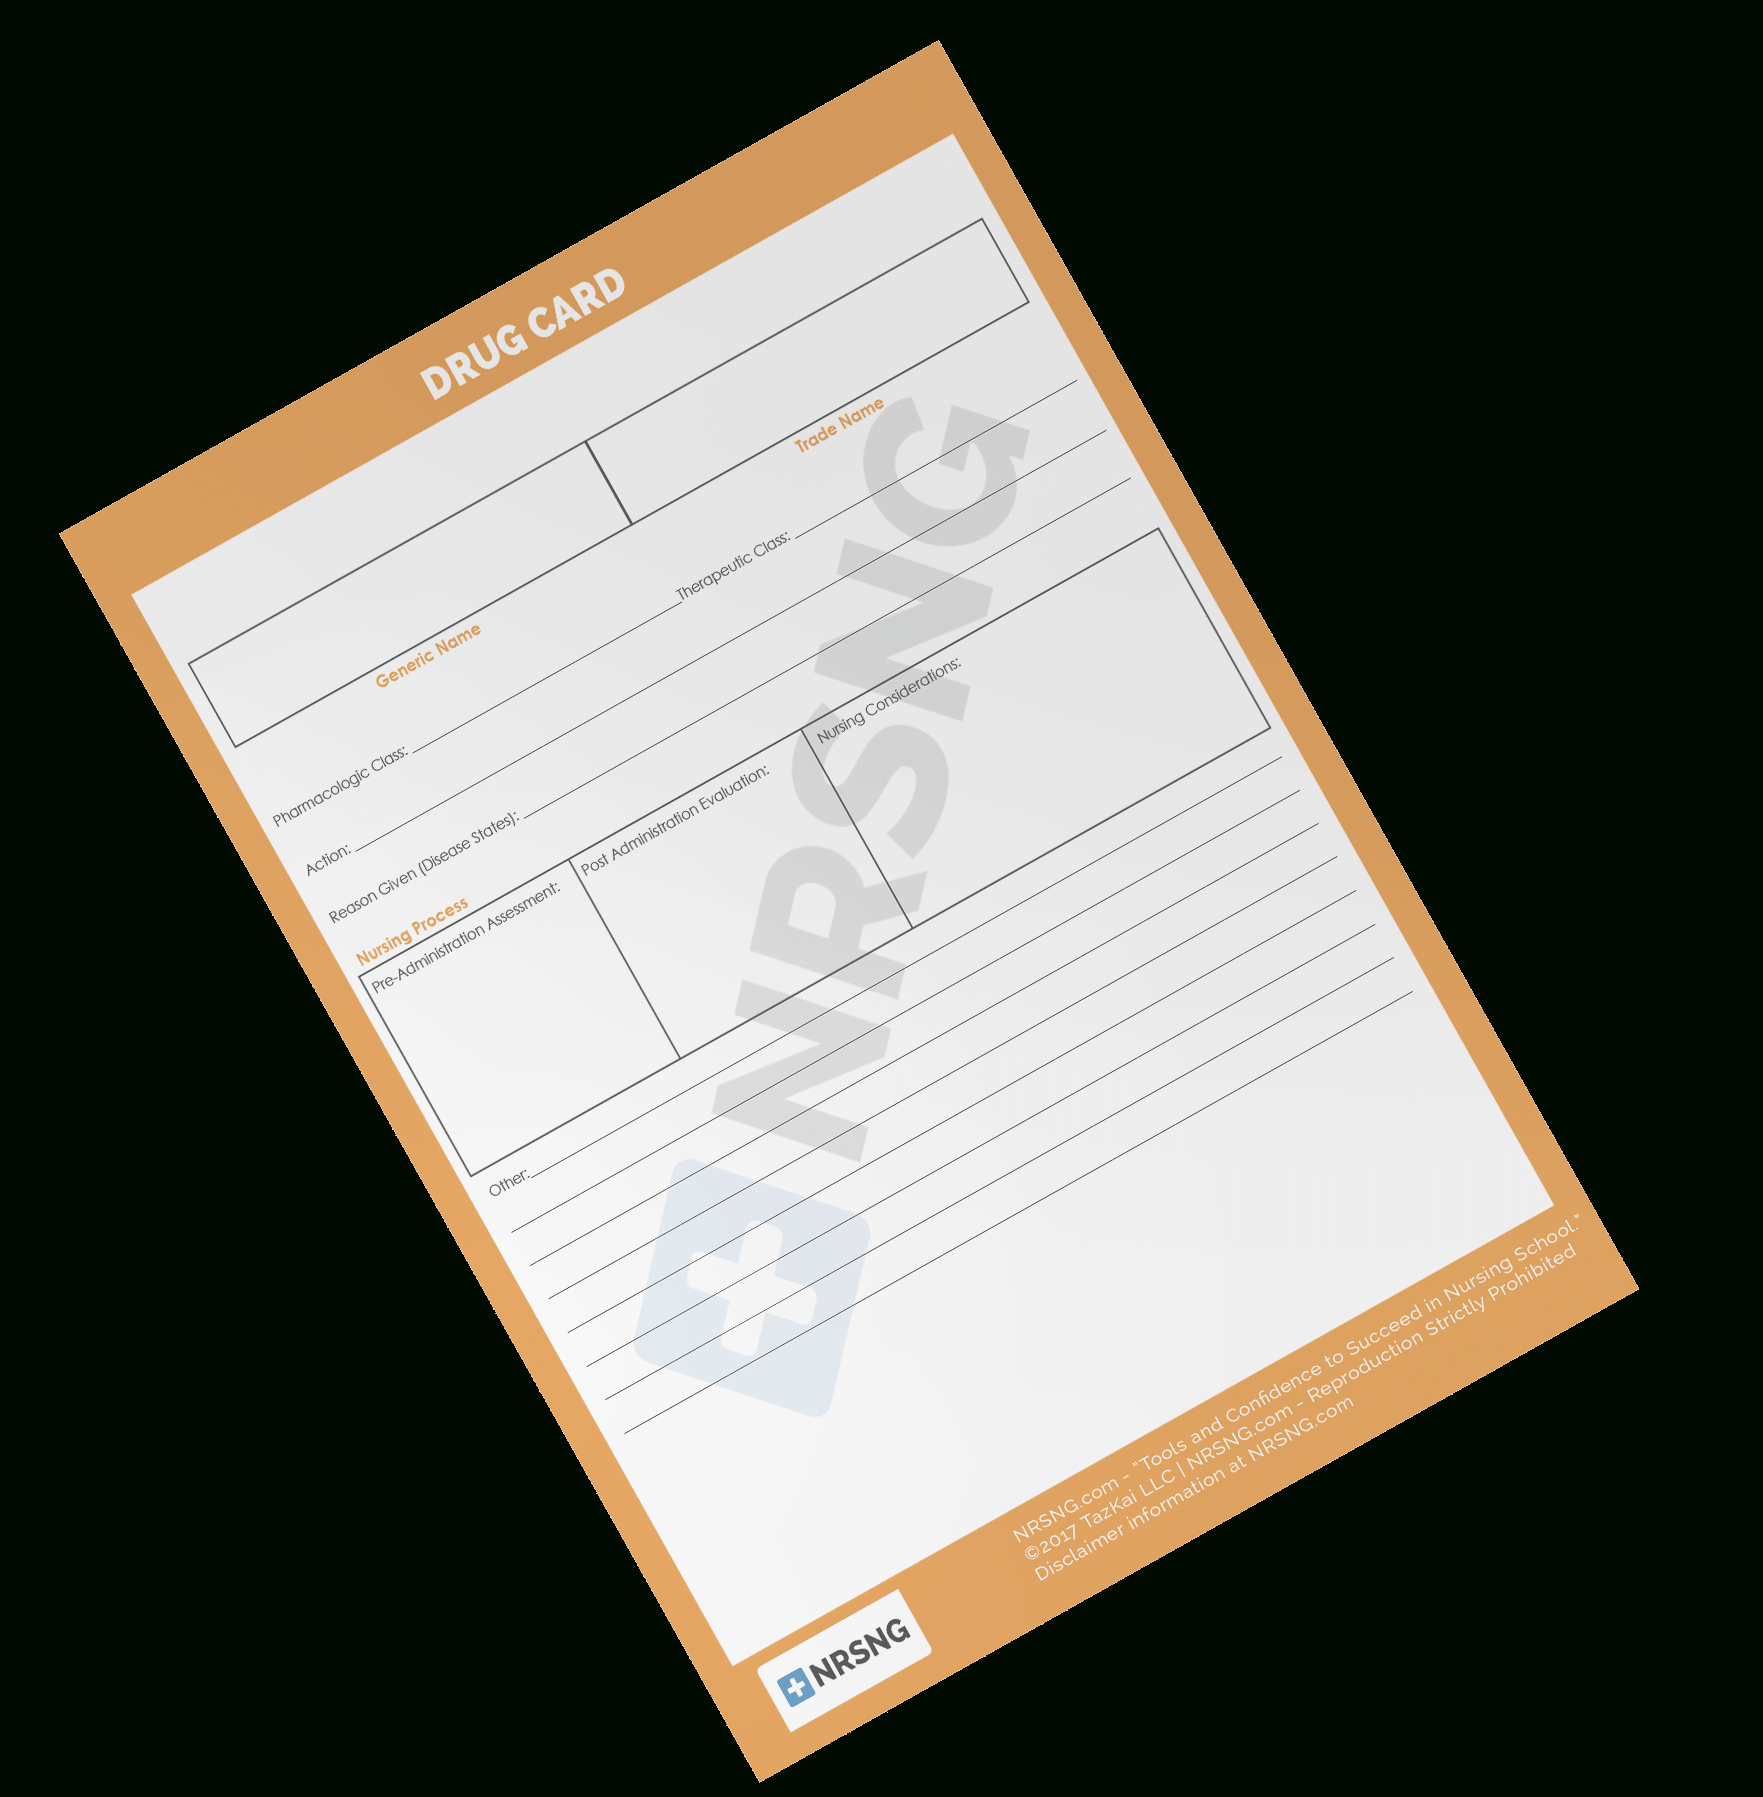 Drug Card Template | Nrsng In Pharmacology Drug Card Template